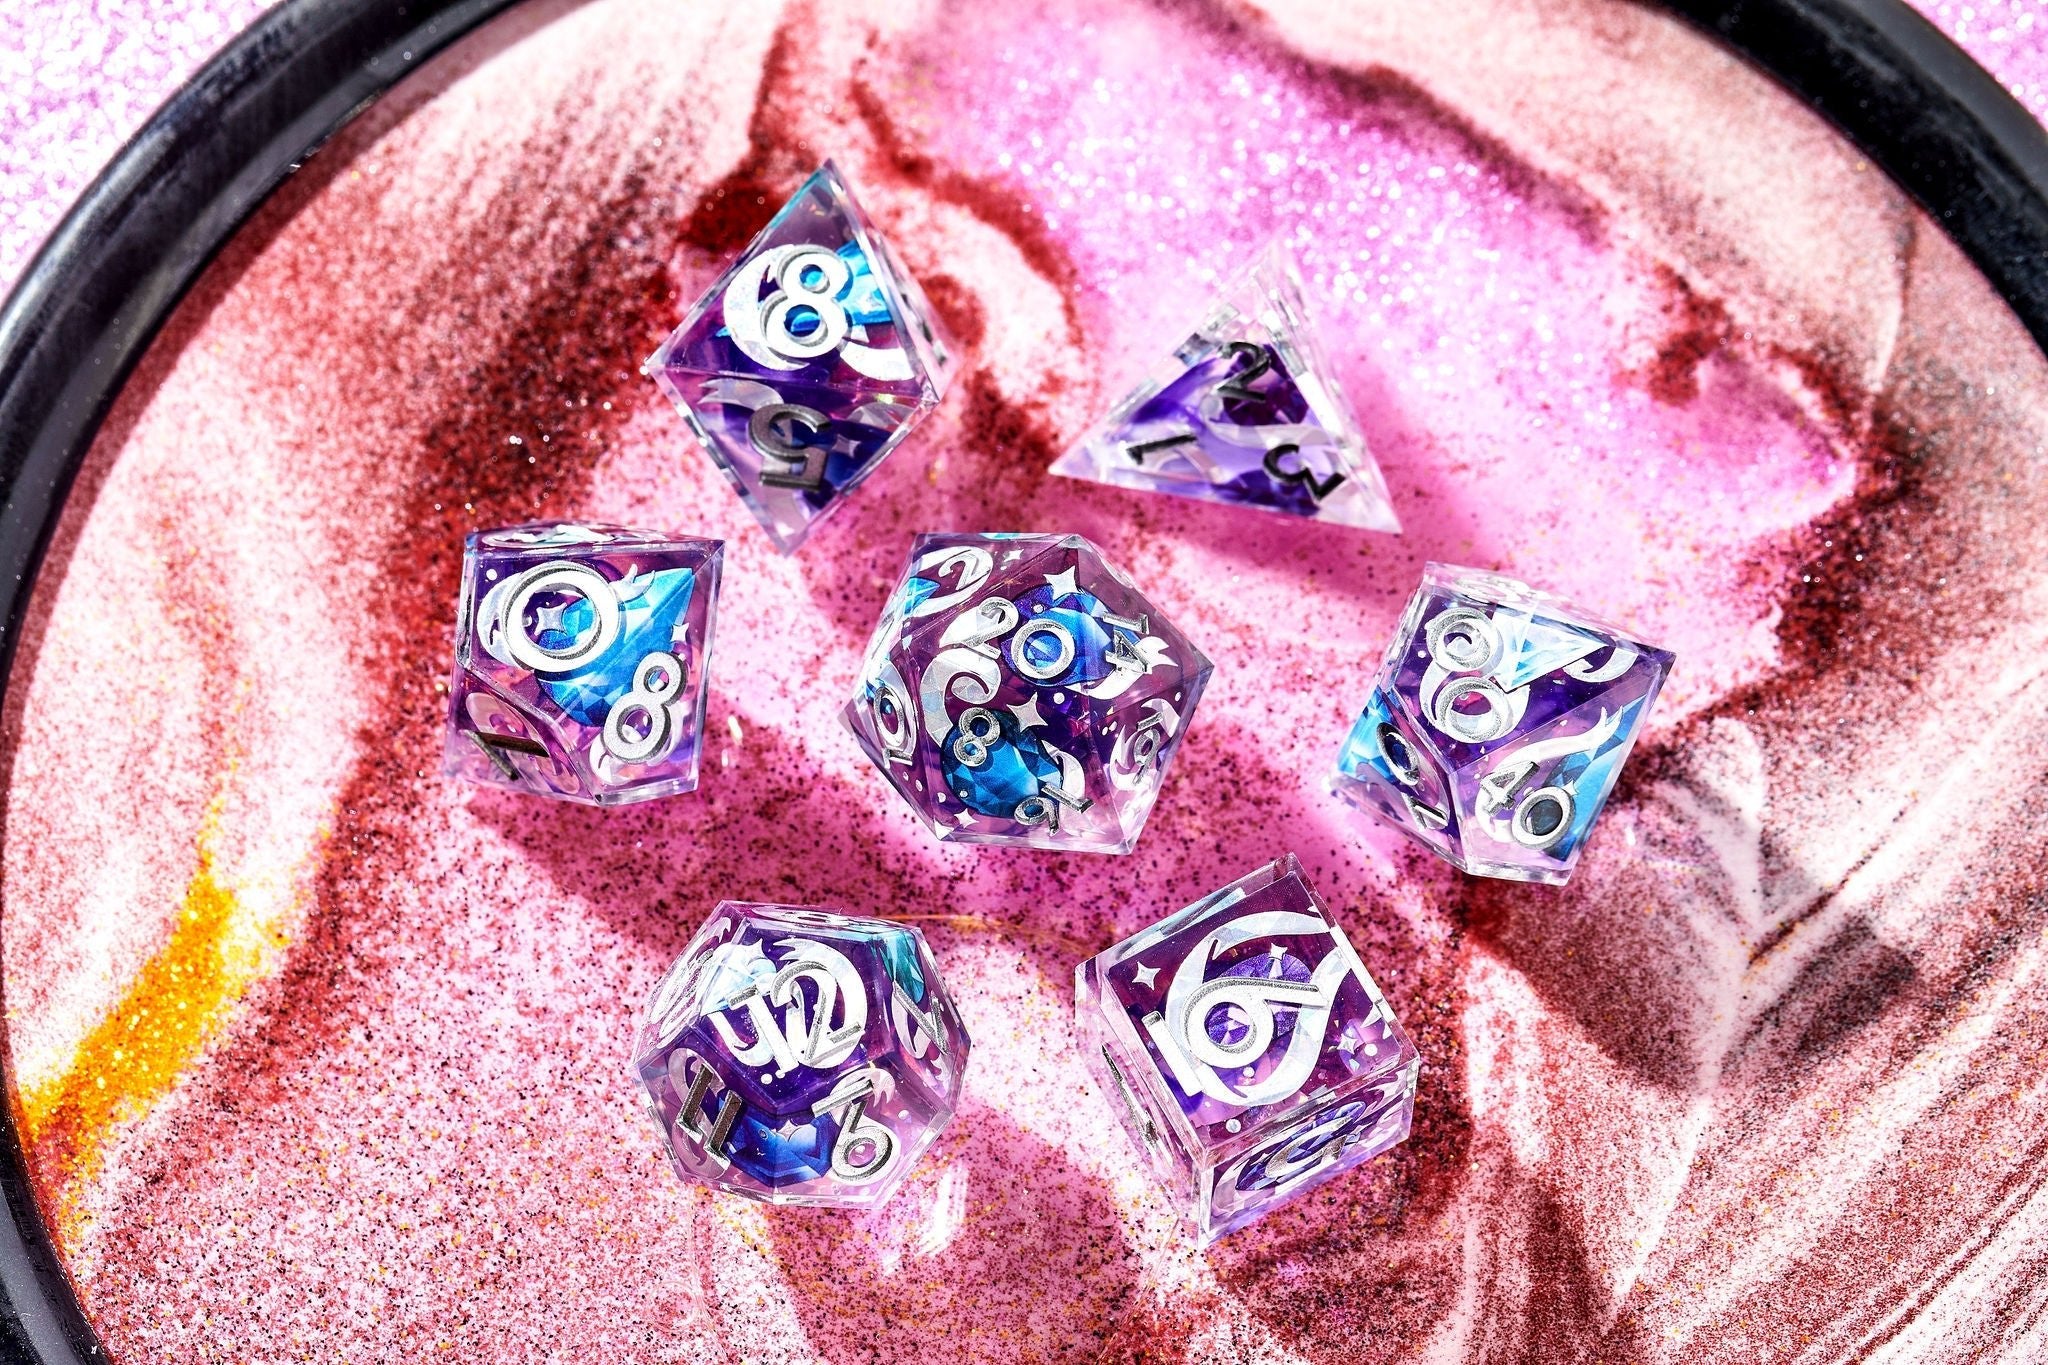 THE ELEMENTAL COLLECTION: A DICE SERIES BY WYRMWOOD & DISPEL - Dispel Dice